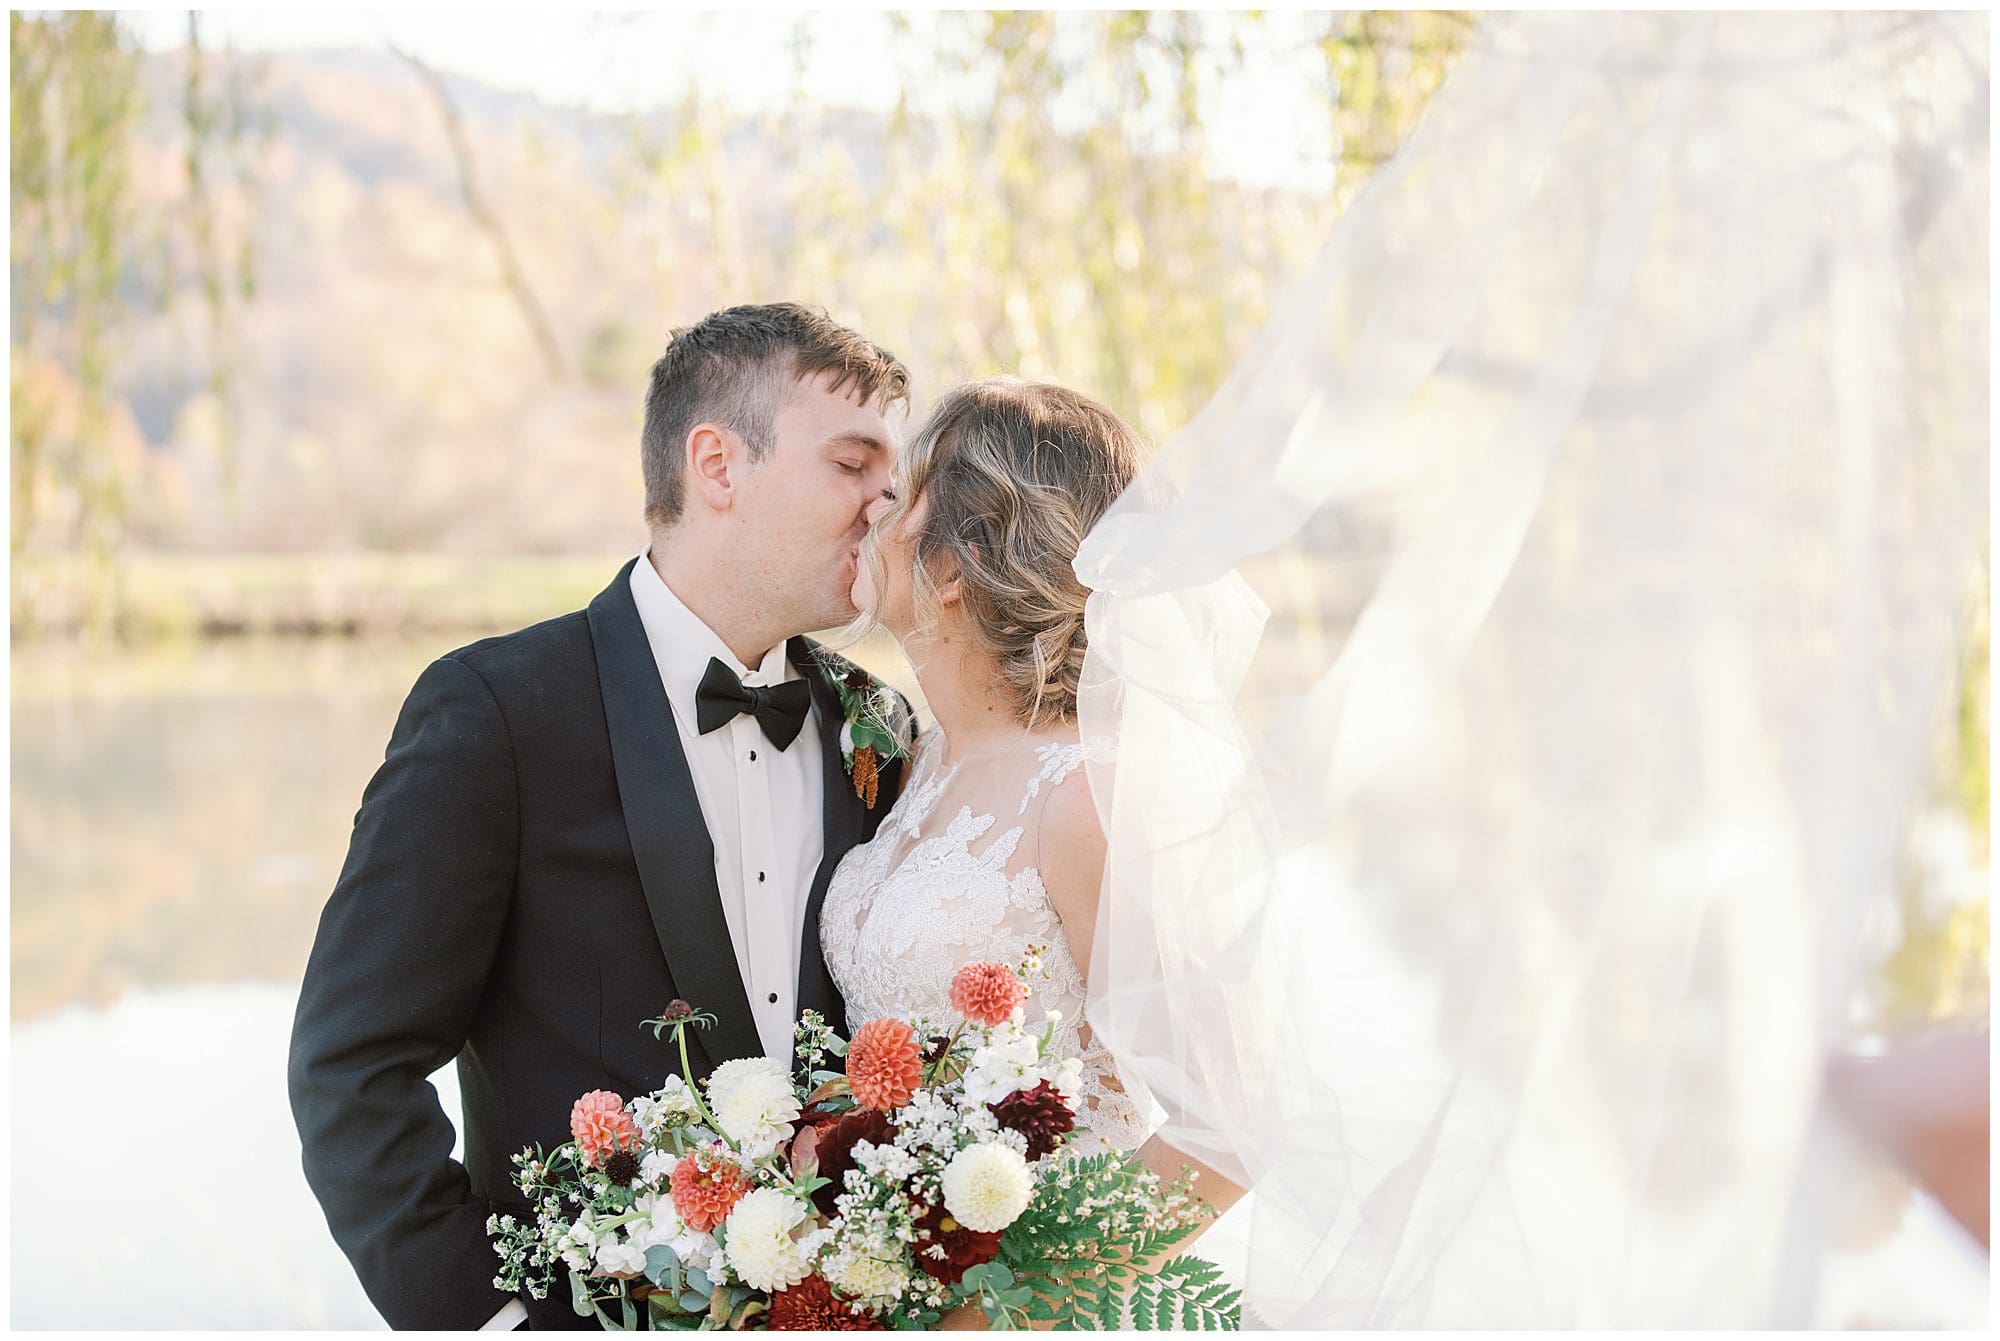 A bride and groom kissing outdoors with the bride's veil flowing in the air, holding a bouquet, with a tranquil lake and trees in the background.